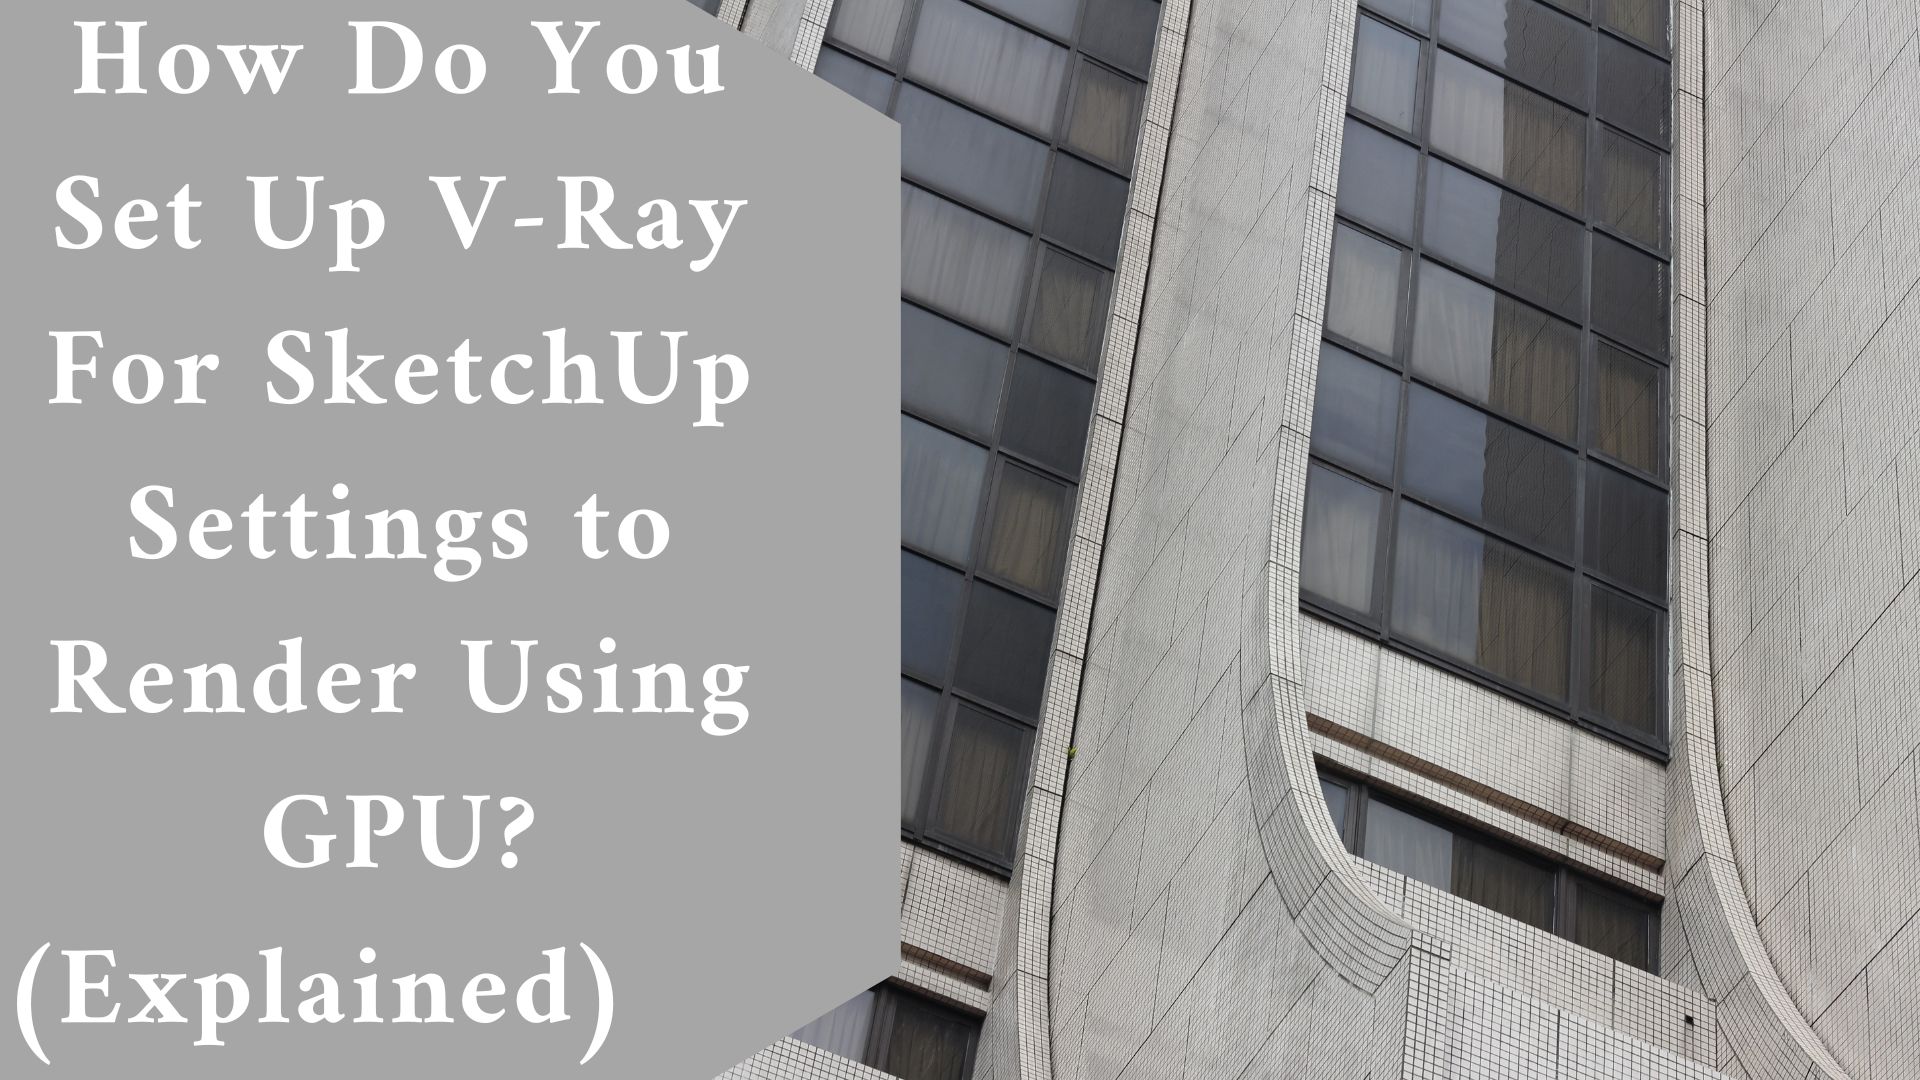 How Do You Set Up V-Ray For SketchUp Settings to Render Using GPU? (Explained)